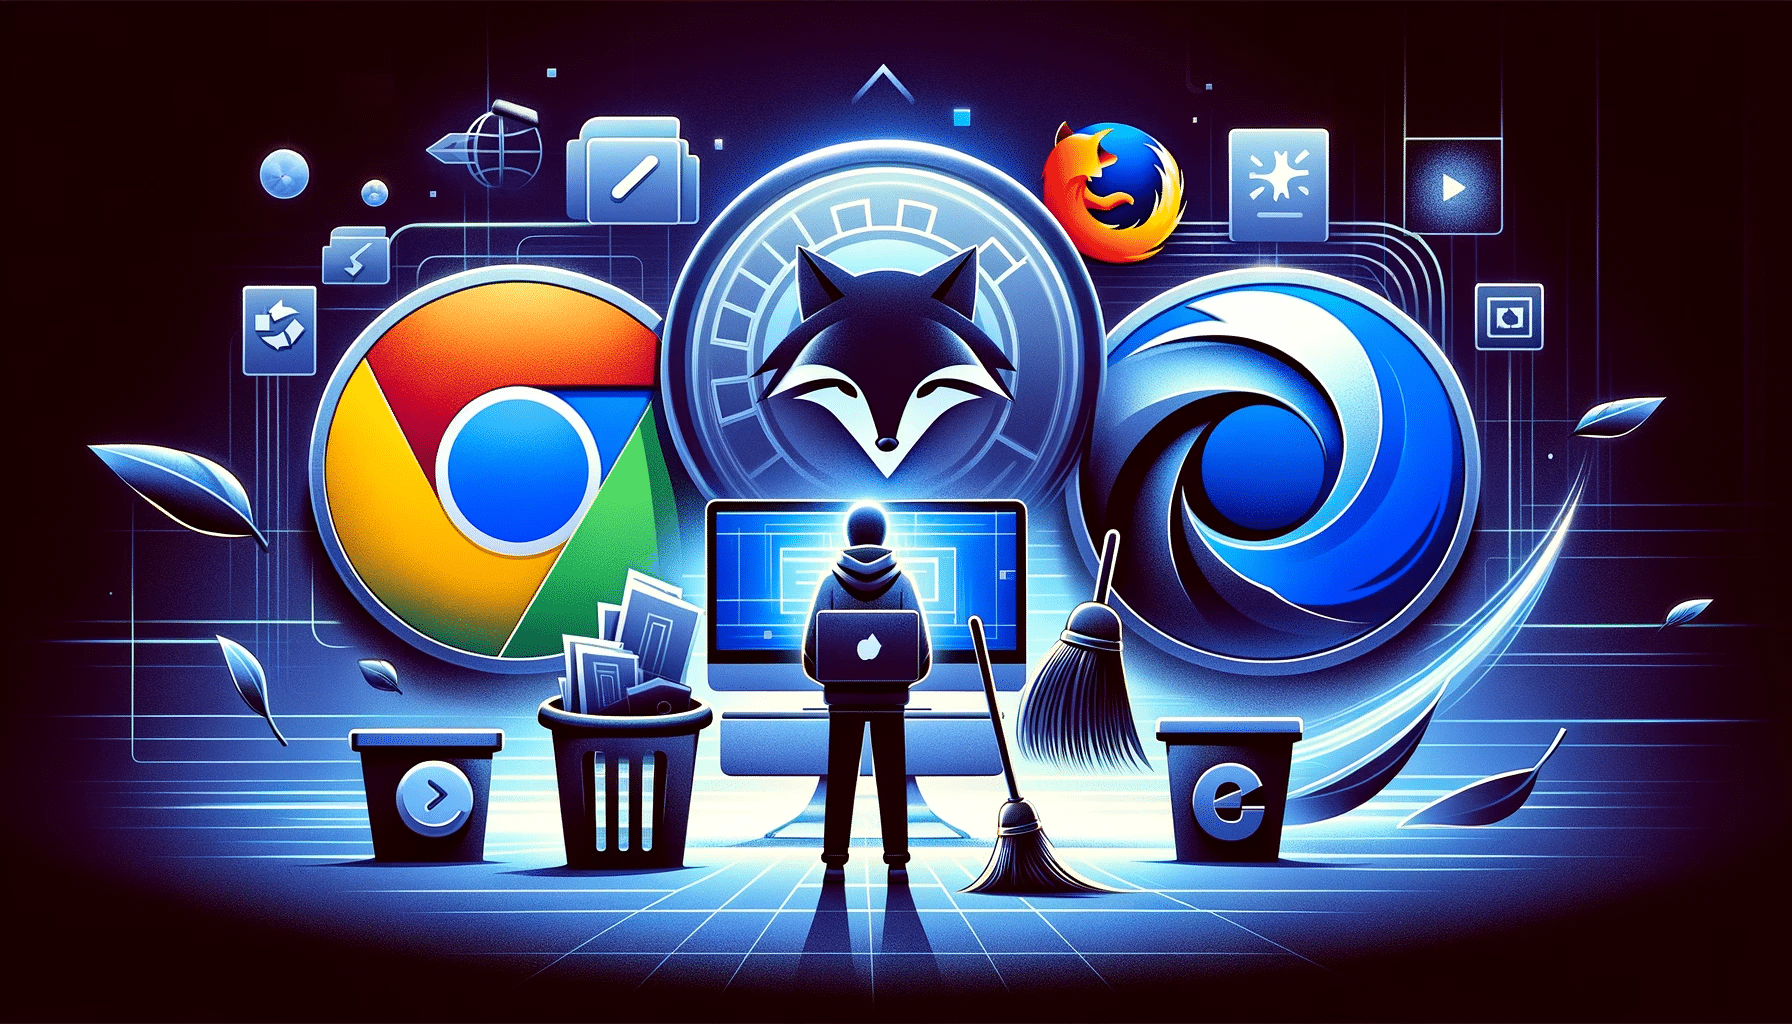 A person stands in front of a laptop, surrounded by oversized web browser icons, with symbolic cleaning tools implying maintenance or upgrade of software.